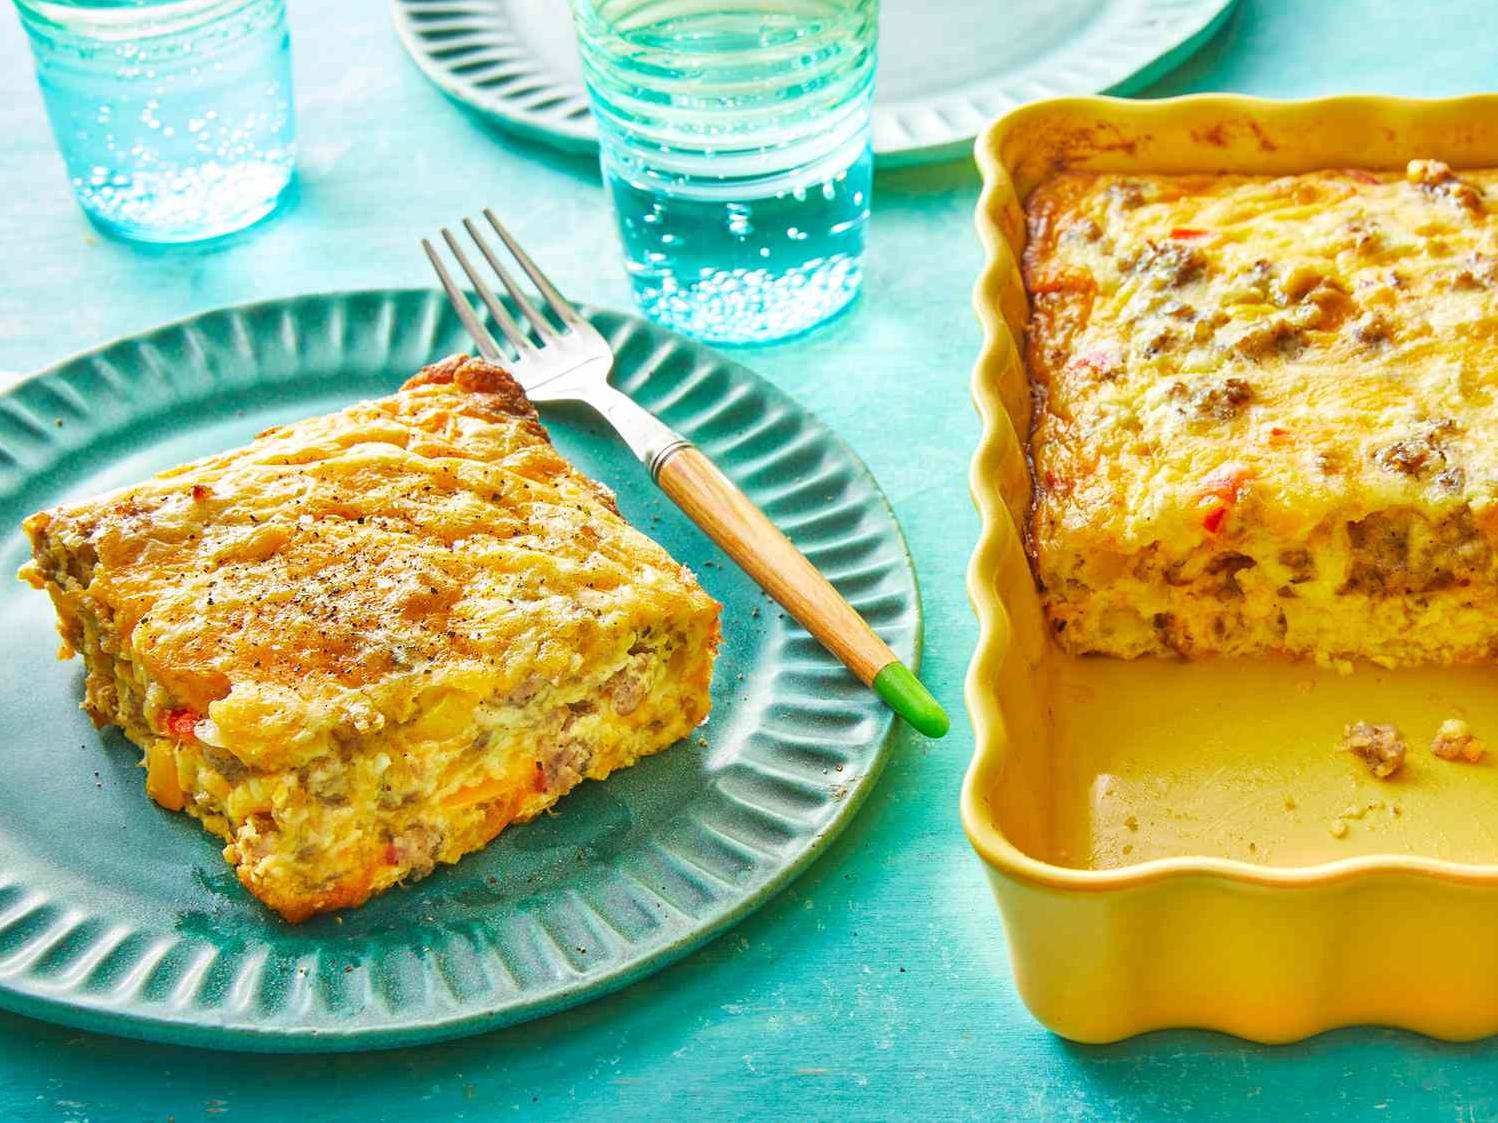 Sausage Egg Casserole from Southern Living